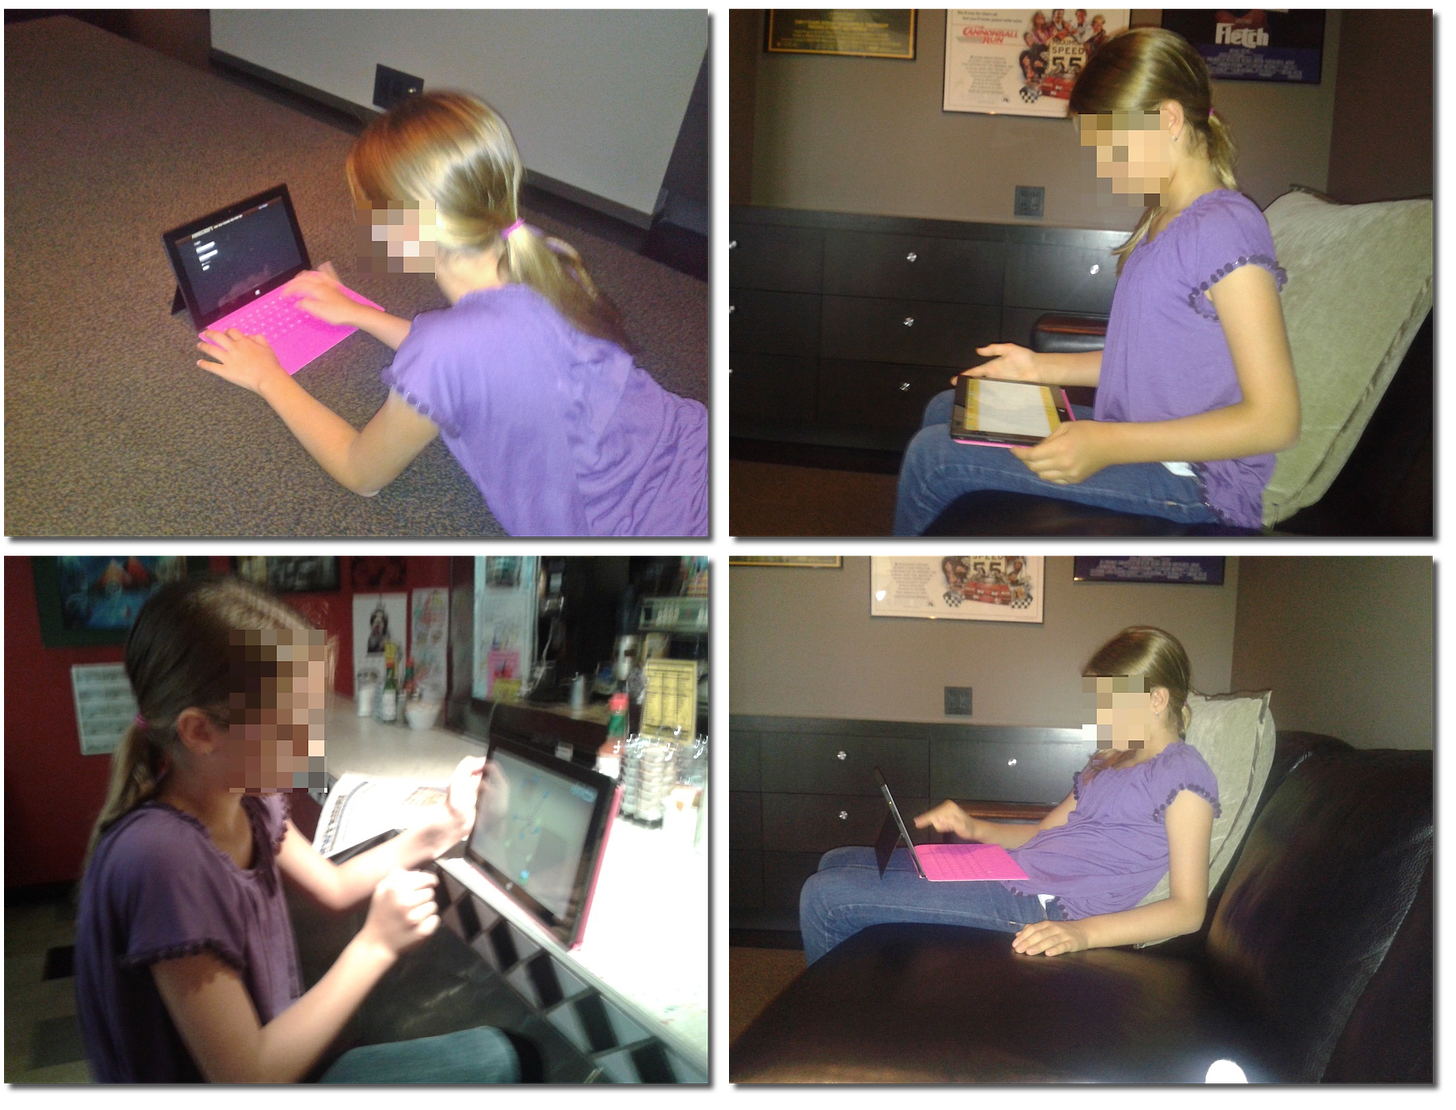 four photos of a young woman using a tablet computer in various positions on the floor, couch, and a counter top